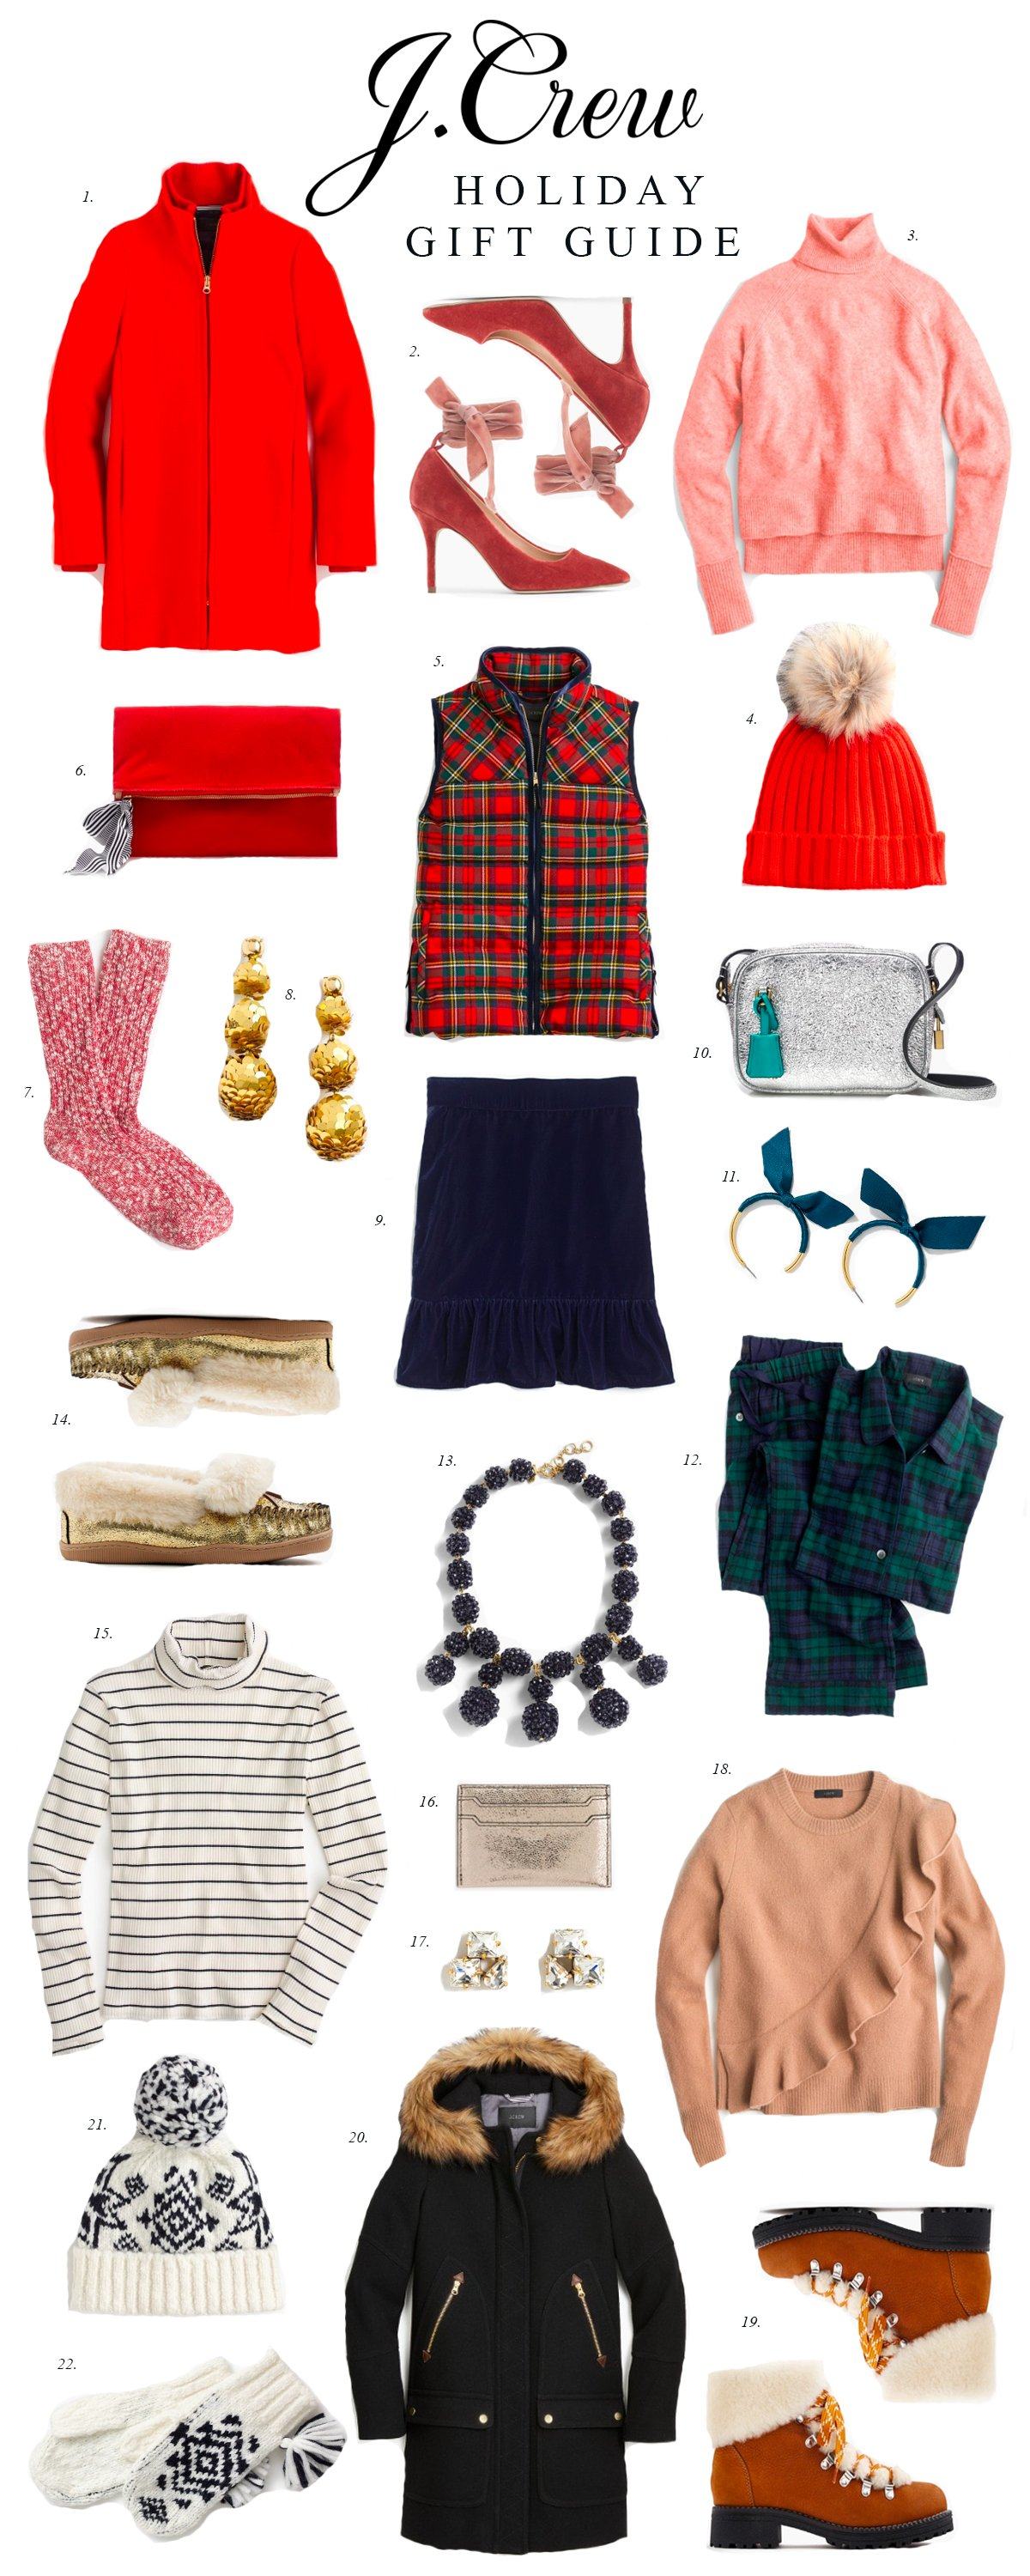 J.Crew Holiday Gift Guide...